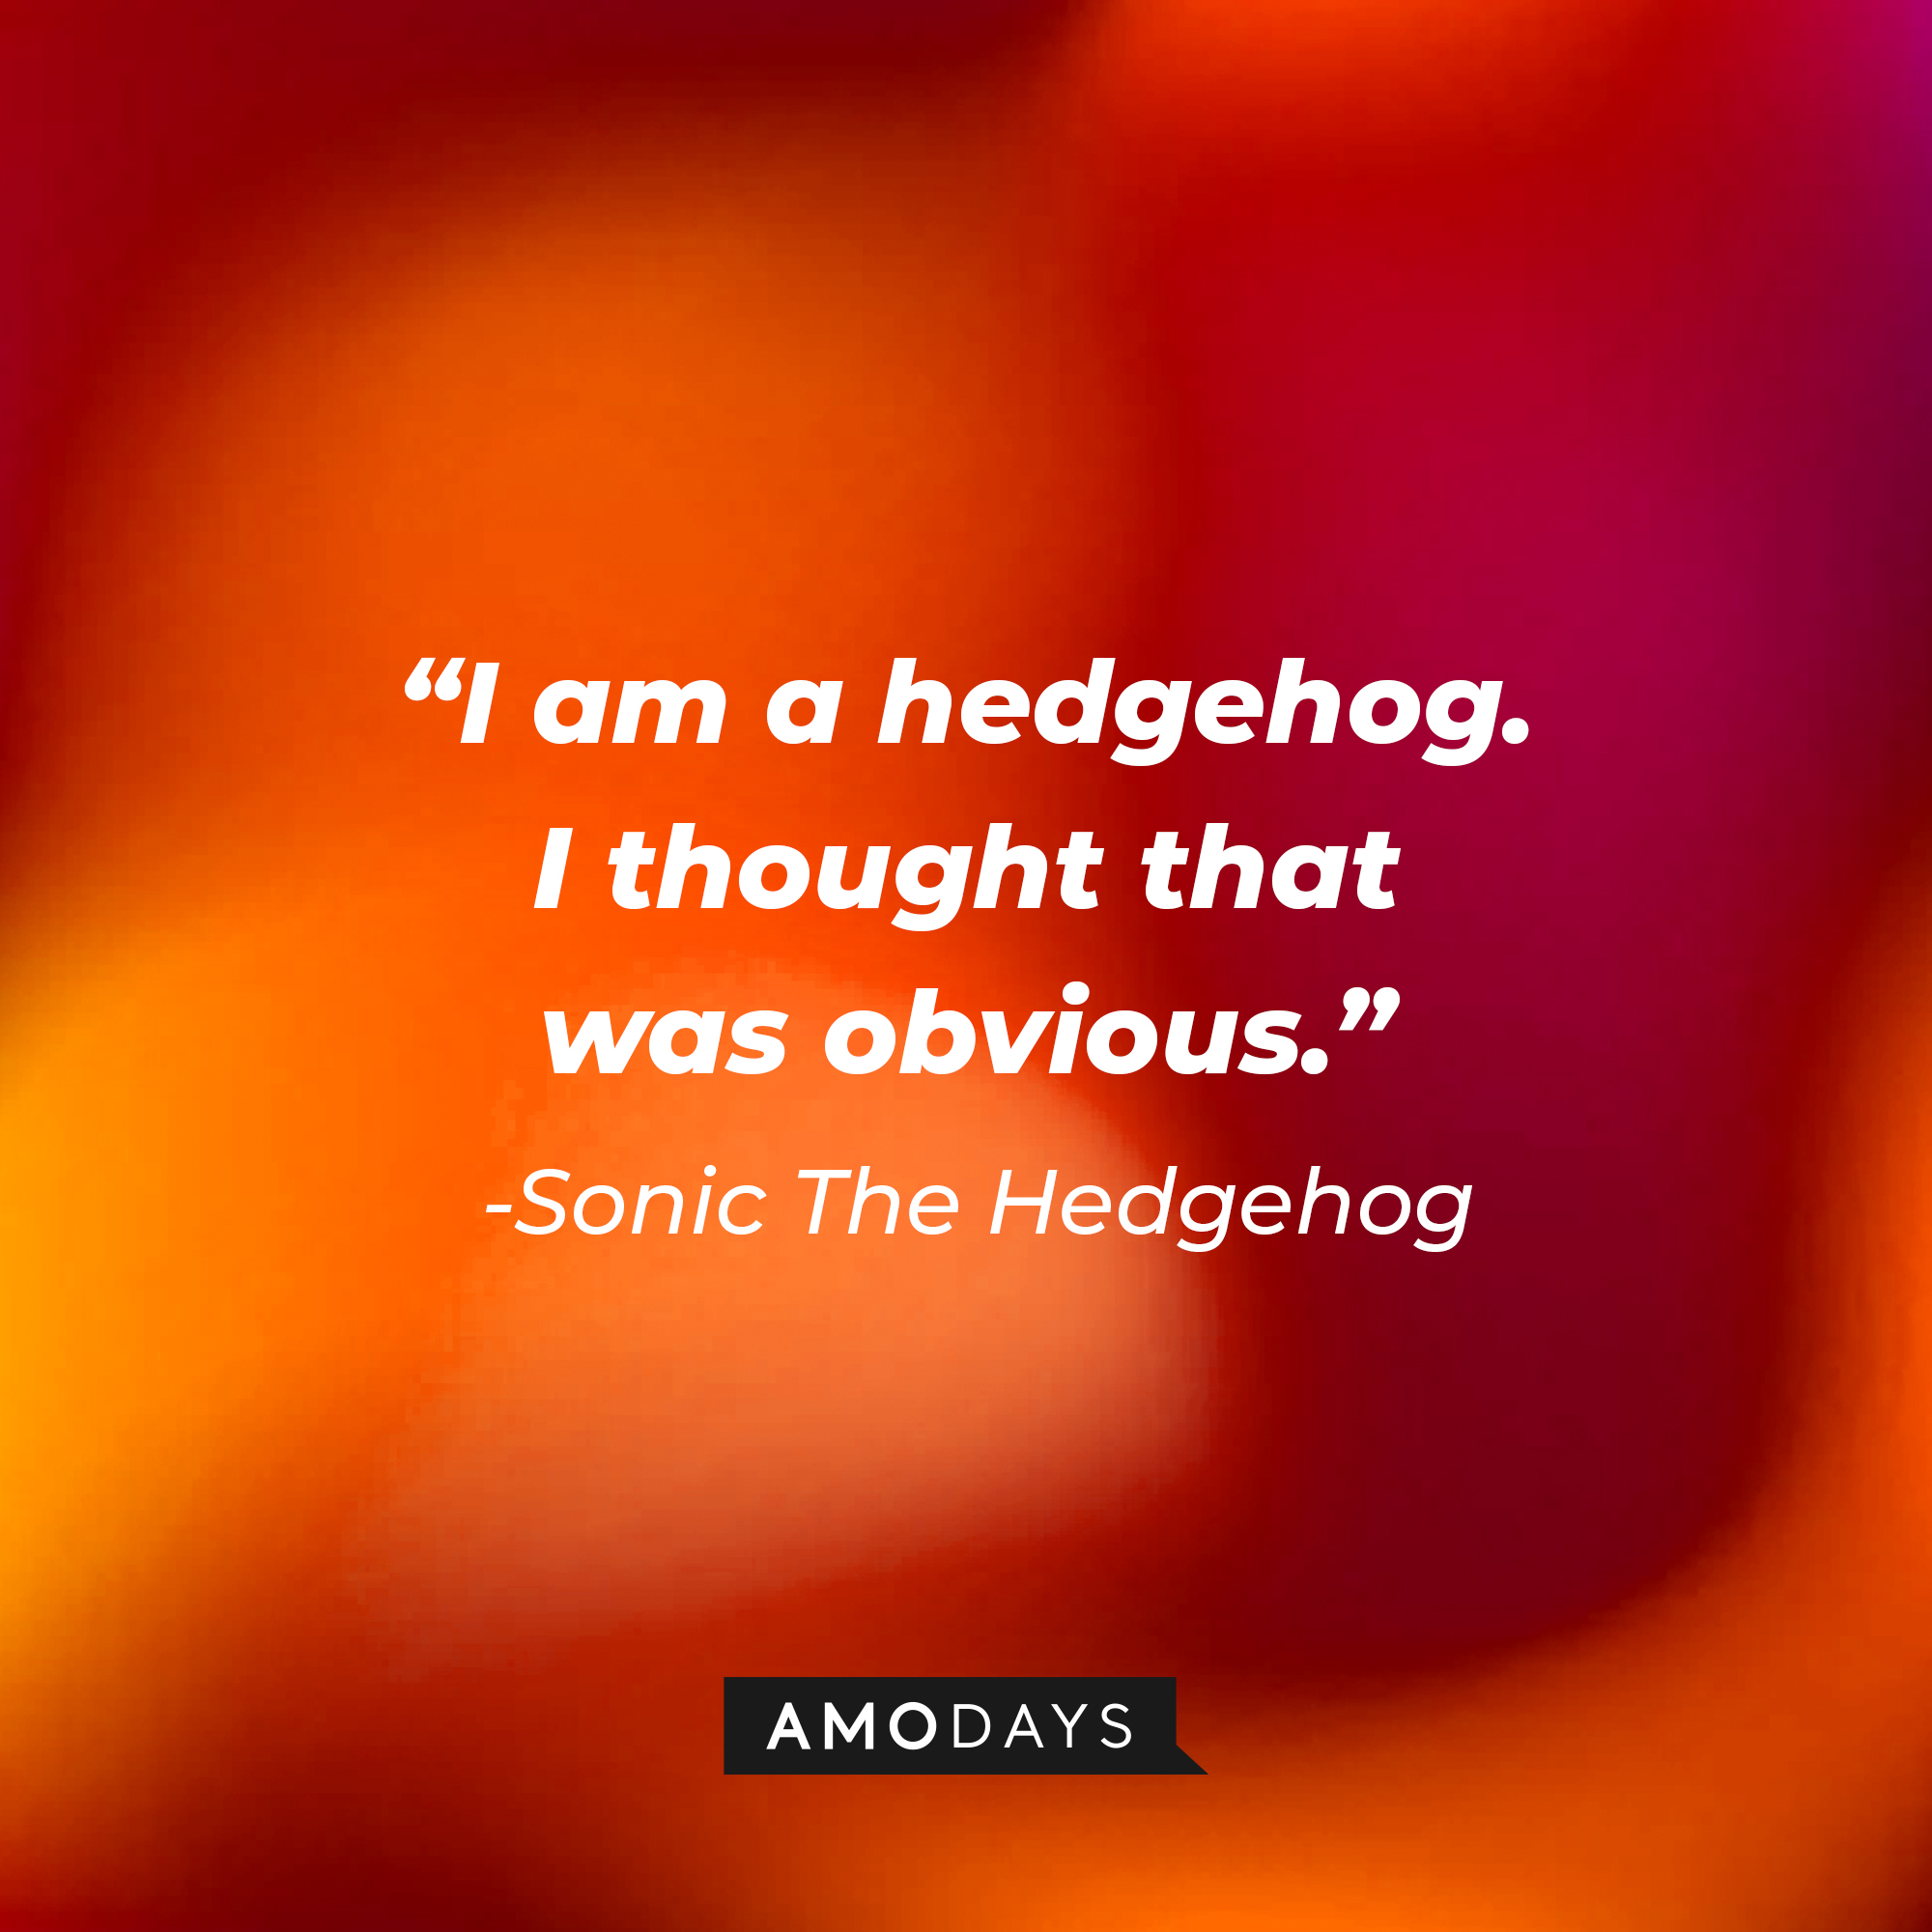 Sonic The Hedgehog's quote: "I am a hedgehog. I thought that was obvious." | Source: Amodays